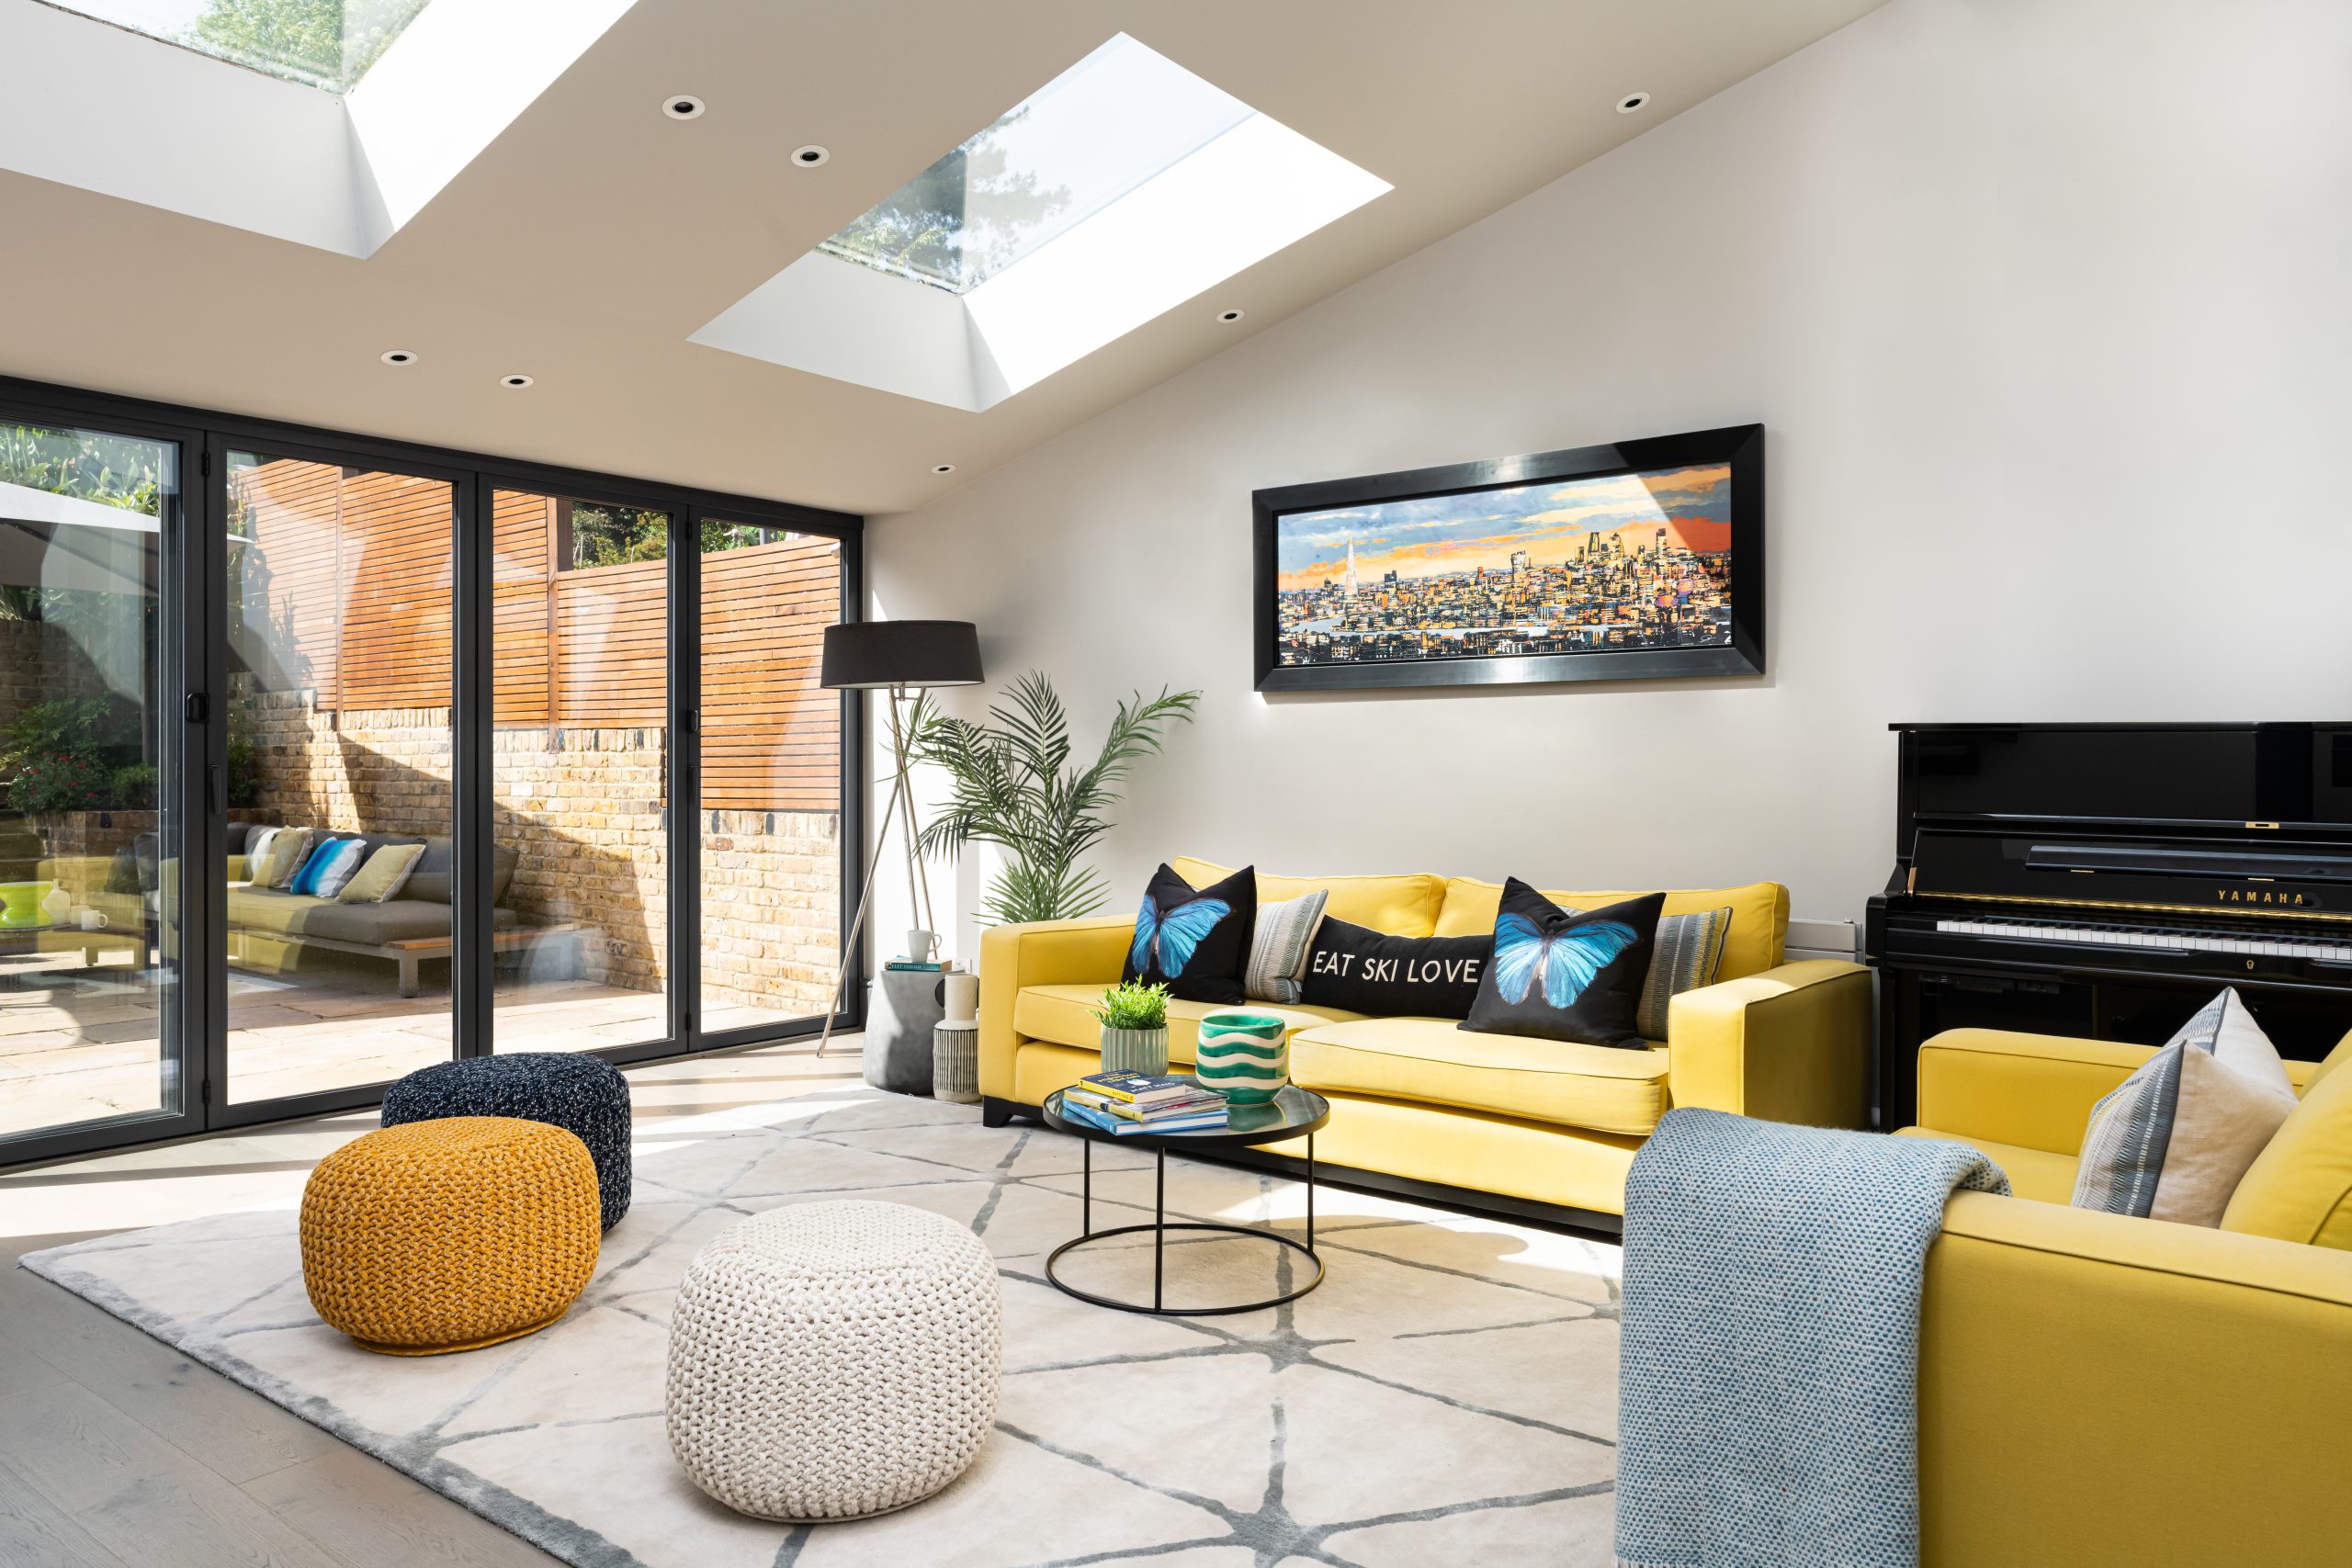 Living area with views onto the garden in Wimbledon Village home design